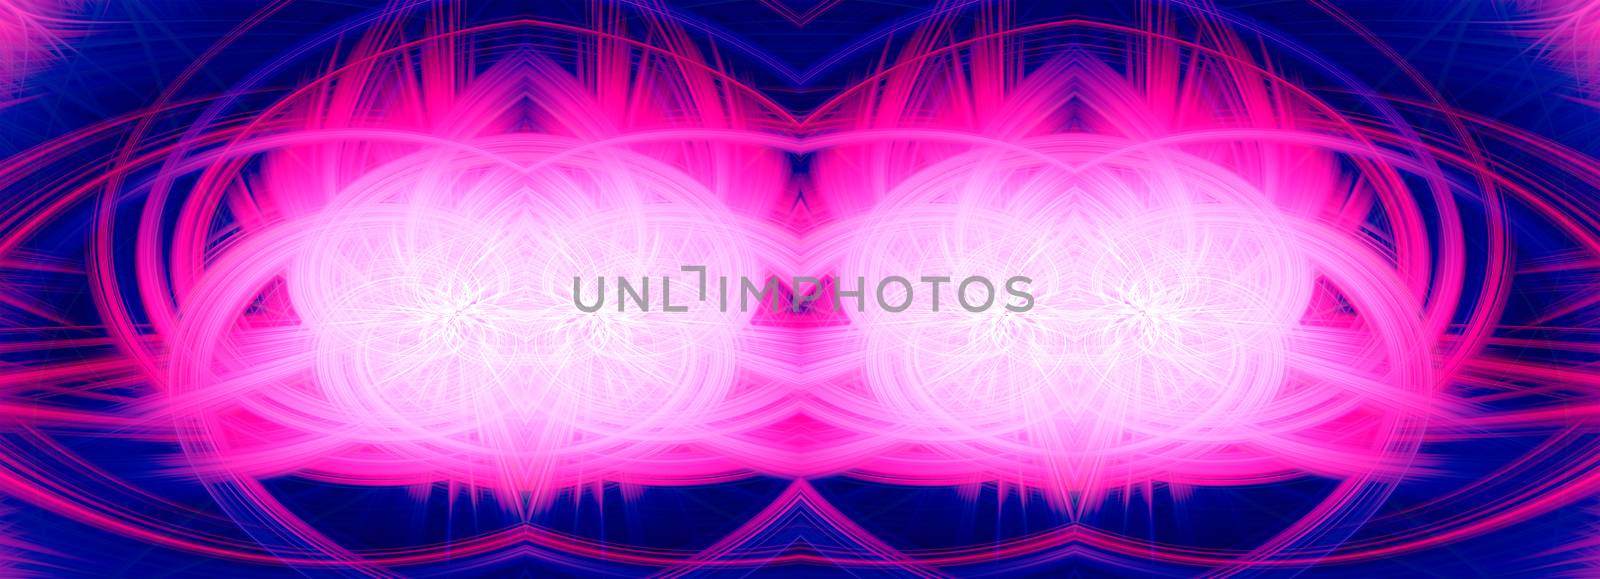 Beautiful abstract intertwined glowing 3d fibers forming a shape of sparkle, flame, flower, interlinked hearts. Blue, maroon, pink, and purple colors. Banner size. Illustration by DamantisZ